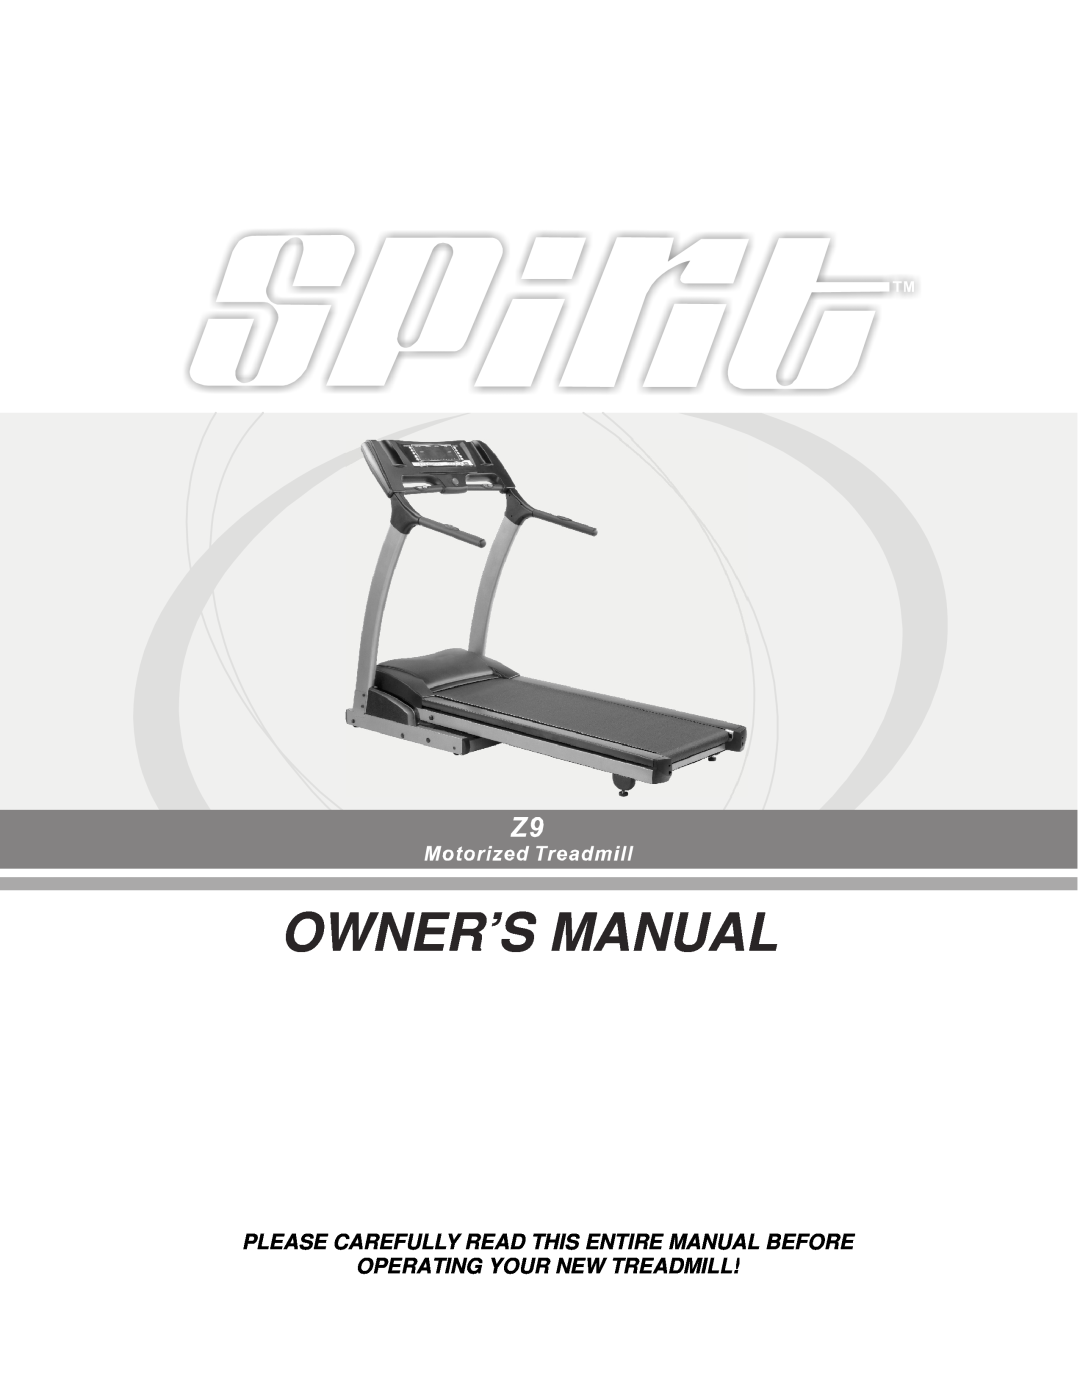 Spirit Z9 owner manual Owner’S Manual, Please Carefully Read This Entire Manual Before, Operating Your New Treadmill 